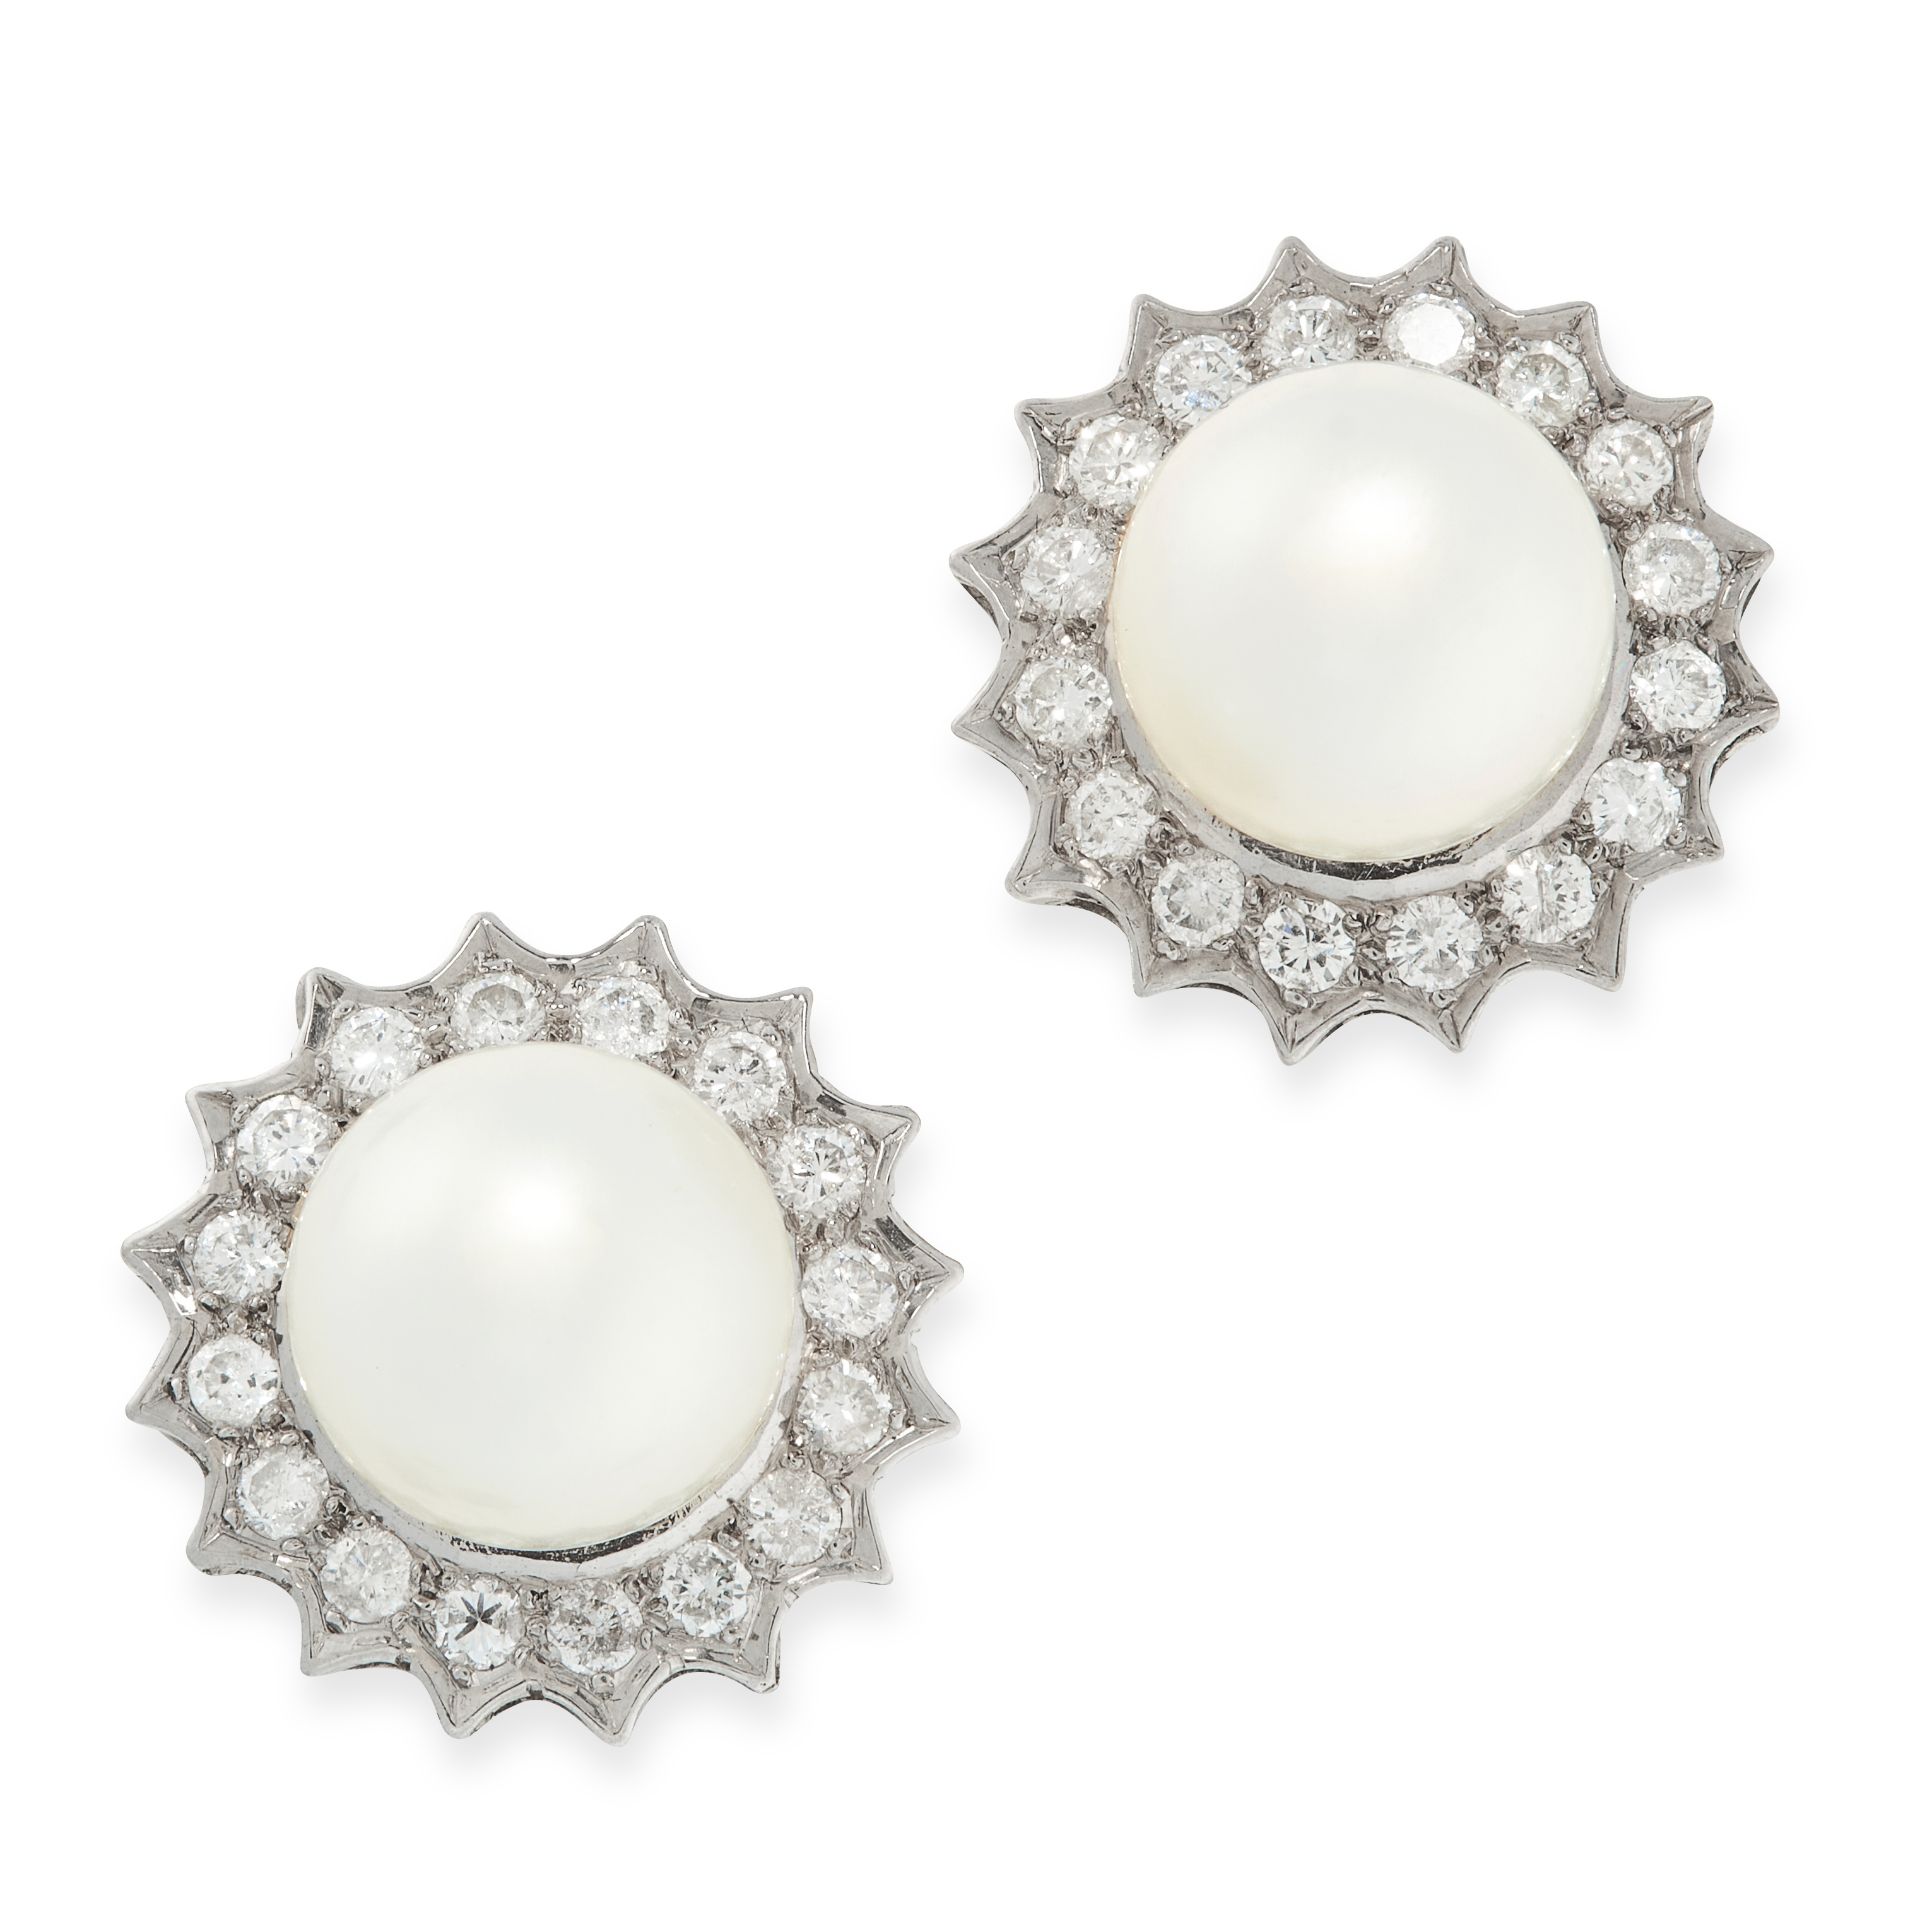 A PAIR OF PEARL AND DIAMOND CLUSTER STUD EARRINGS in 18ct white gold, each set with a central